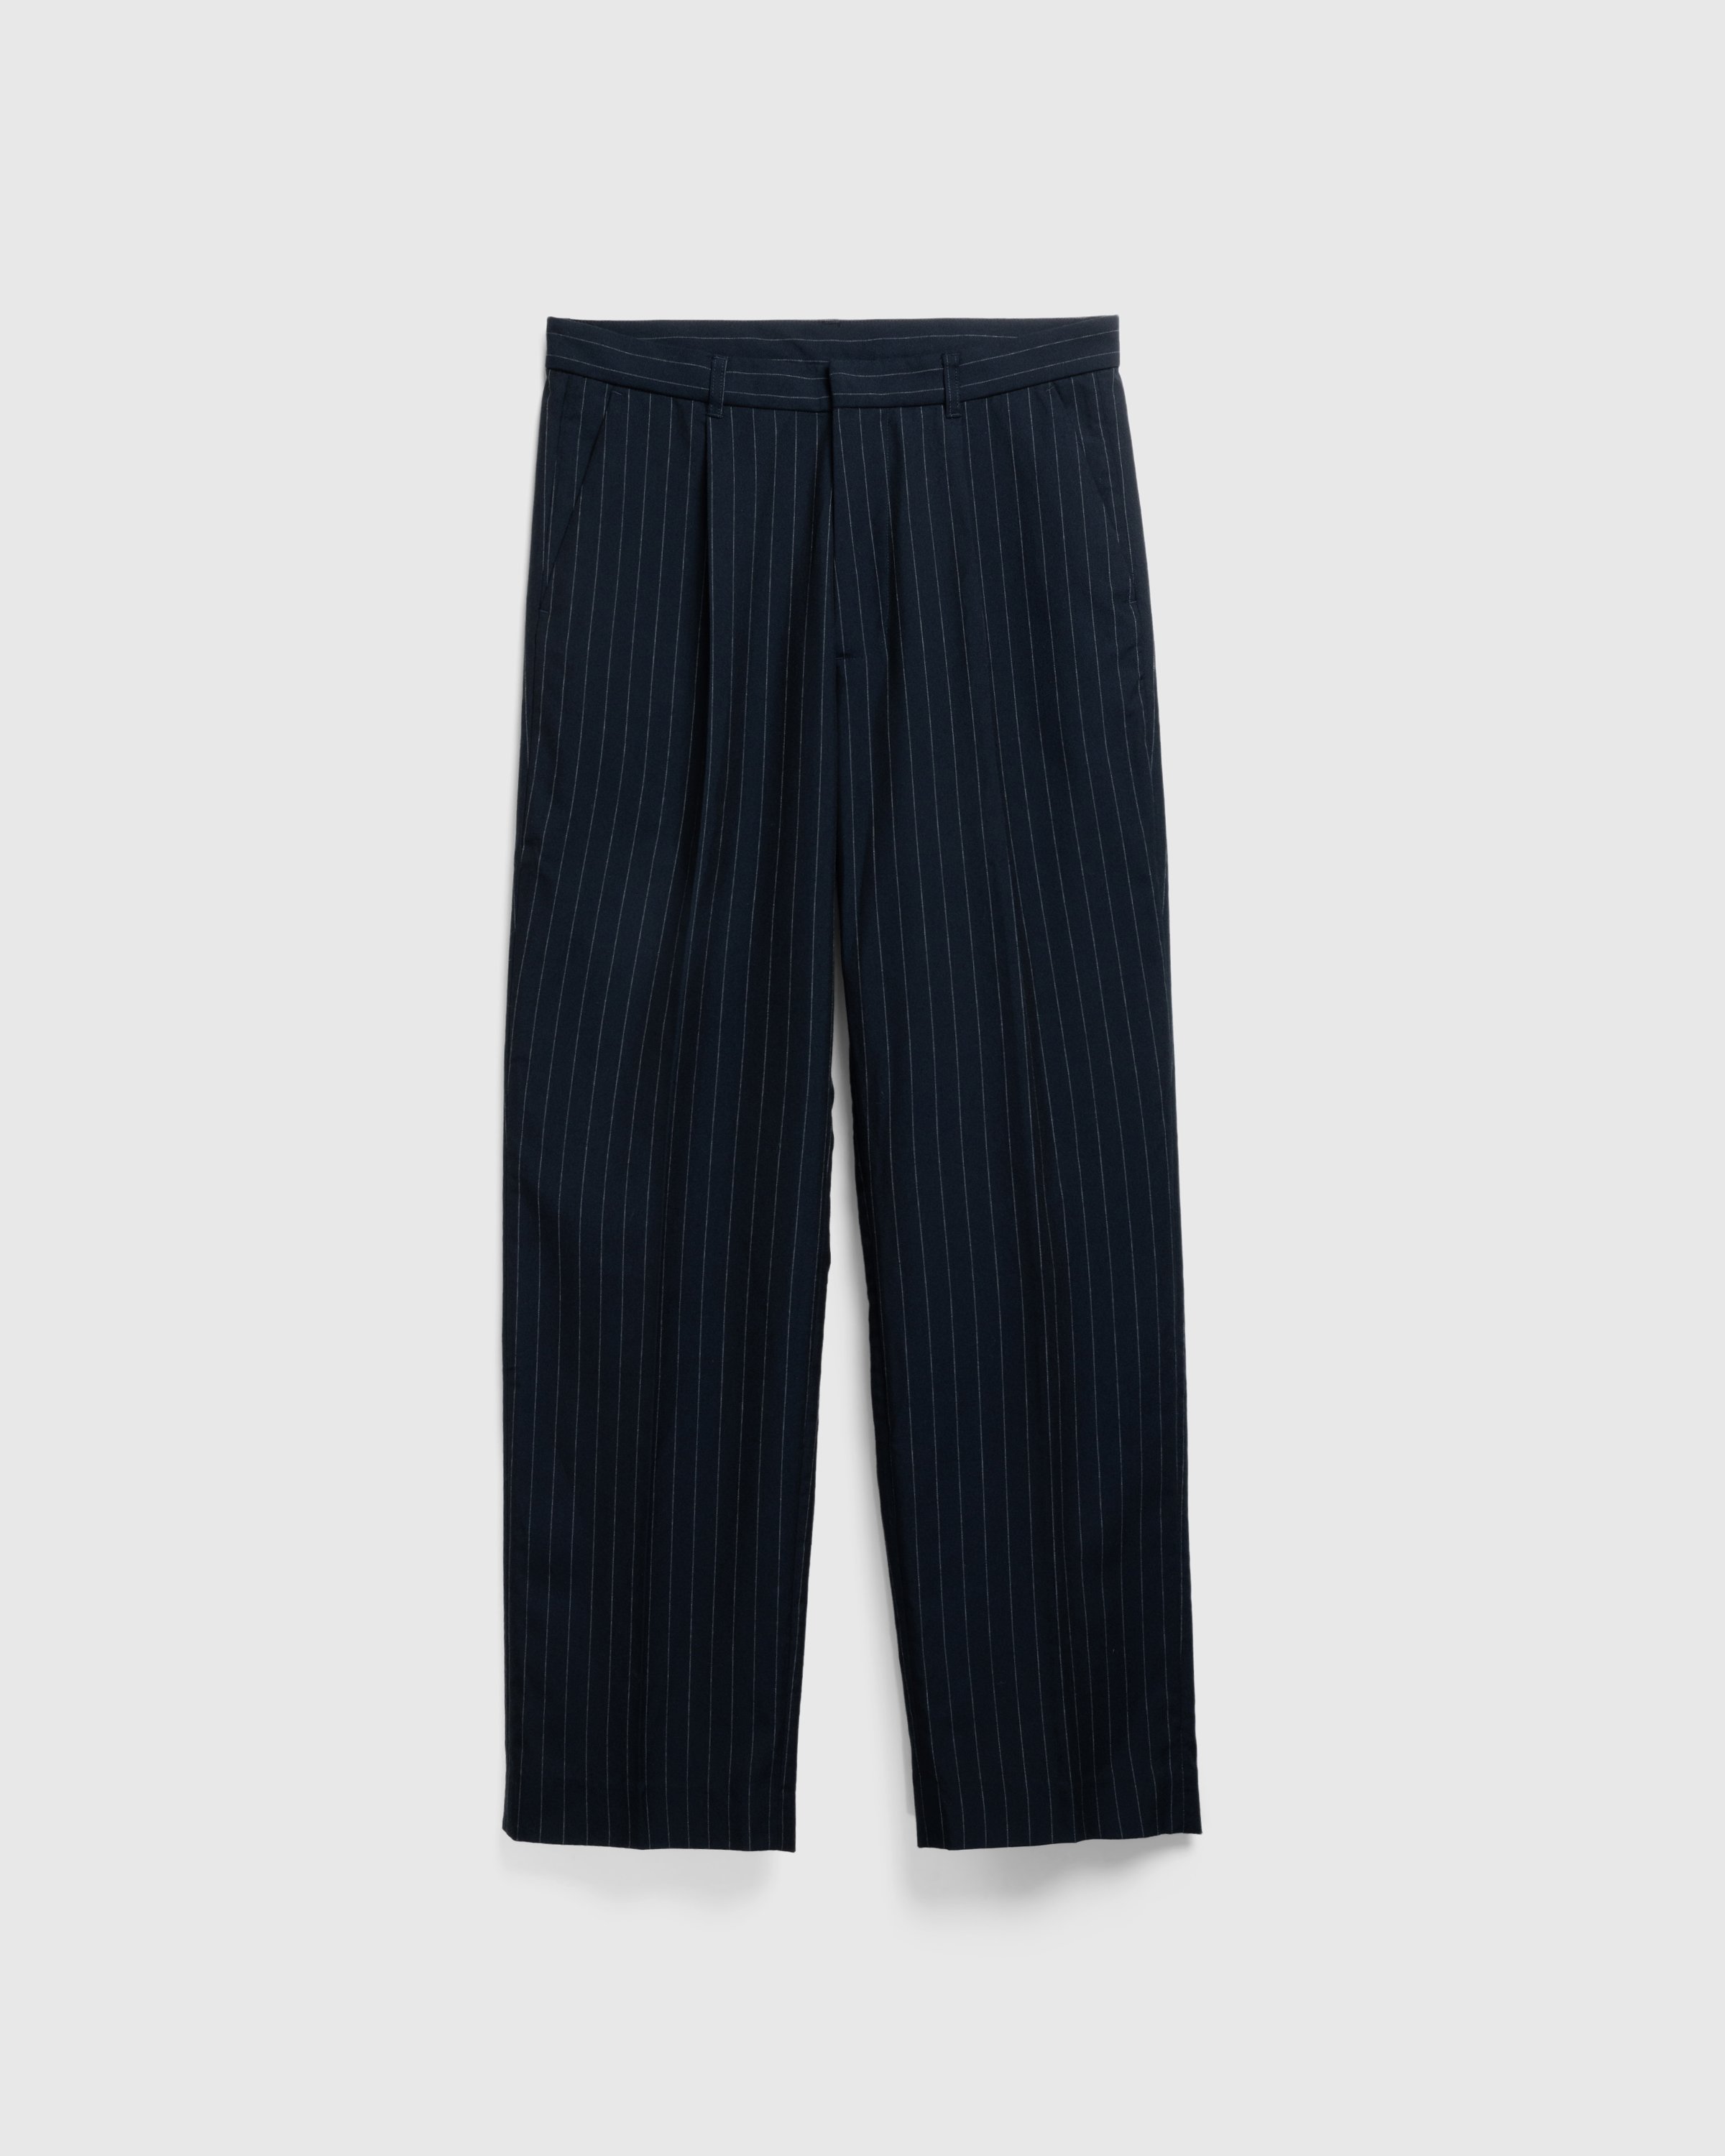 Highsnobiety HS05 - Tropical Suiting Pants Navy Striped - Clothing - Navy Striped - Image 1